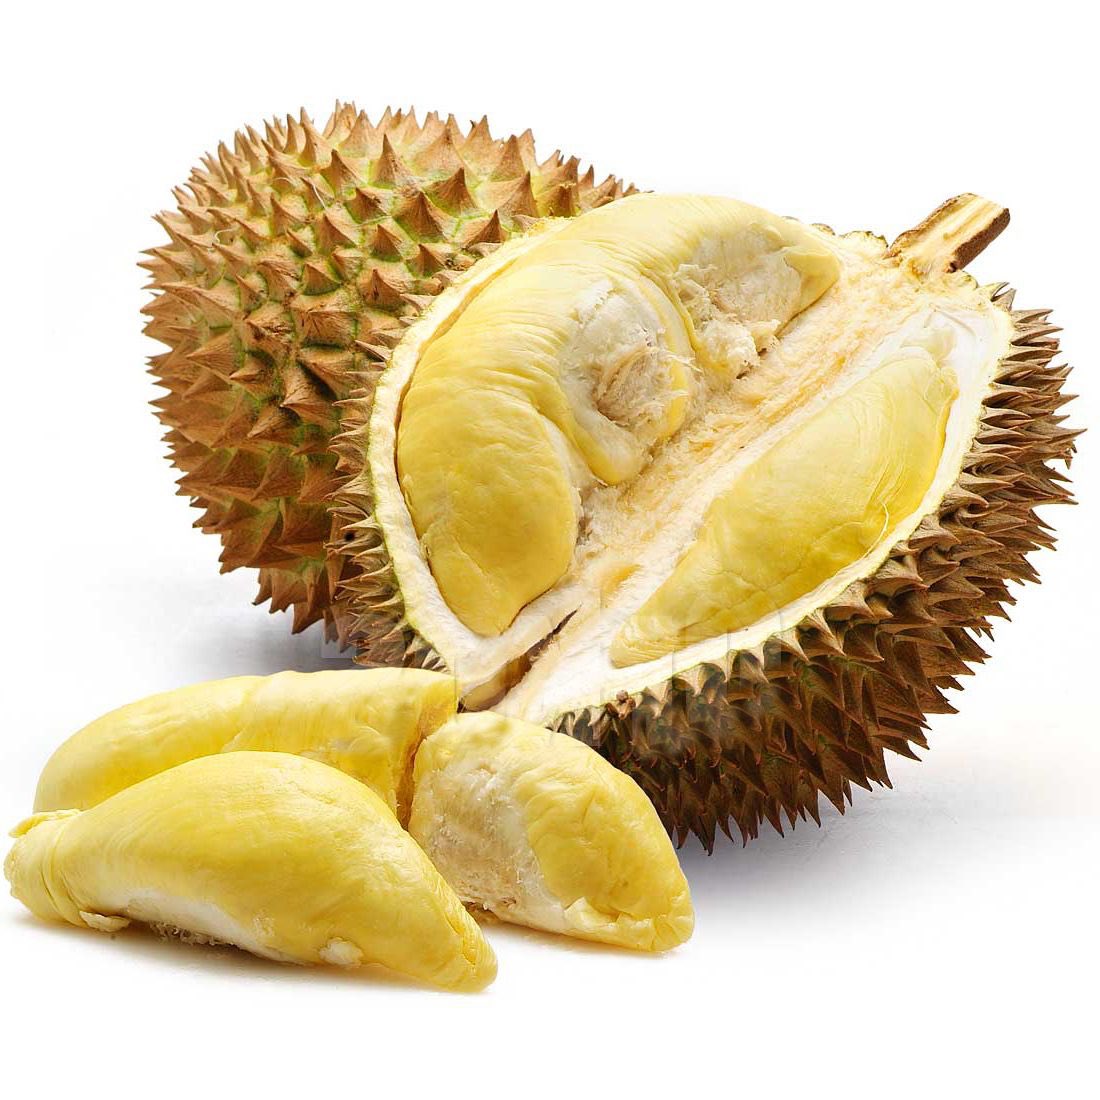 Xue Yang - durian- stinky- some ppl love, some ppl hate